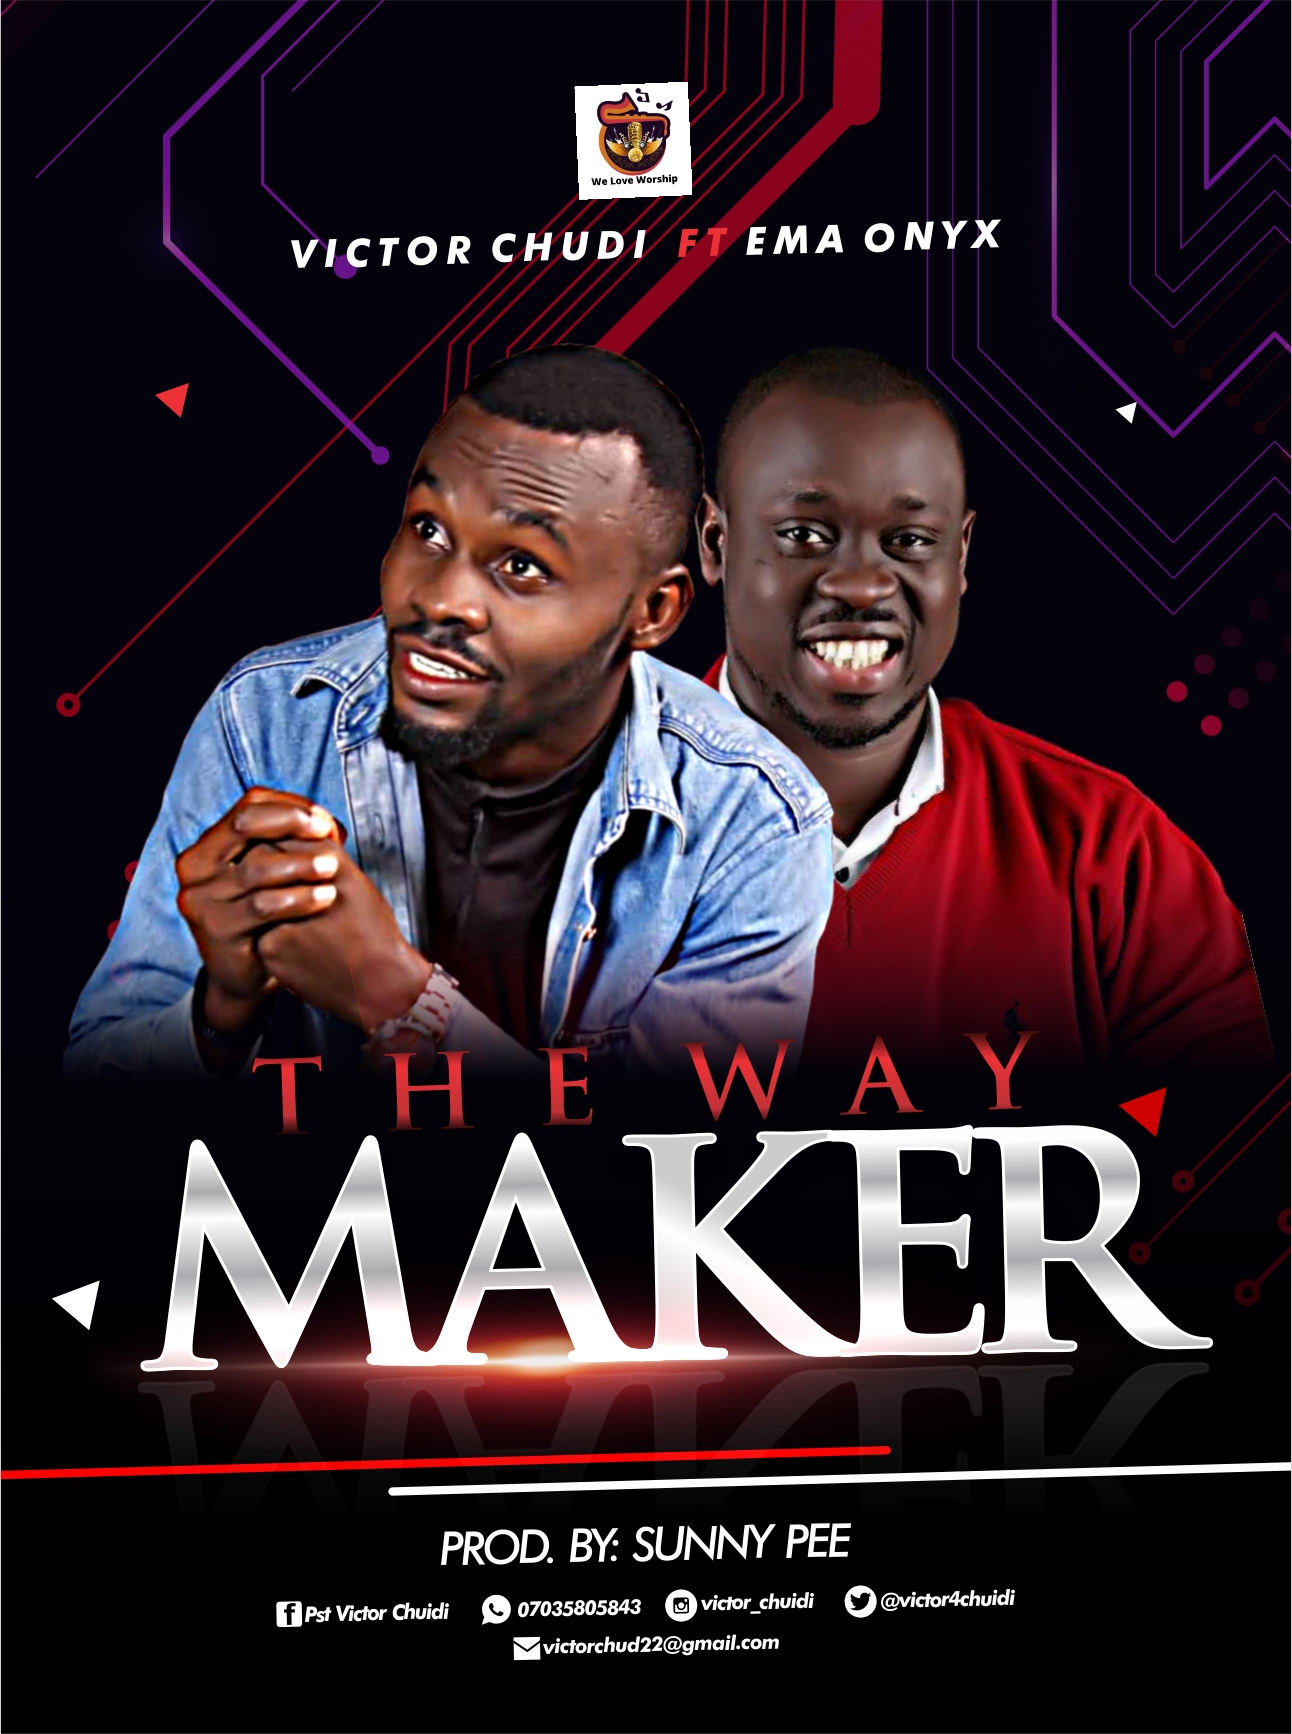 Download THE WAY MAKER by Victor Chudi (MP3 SONG) 20